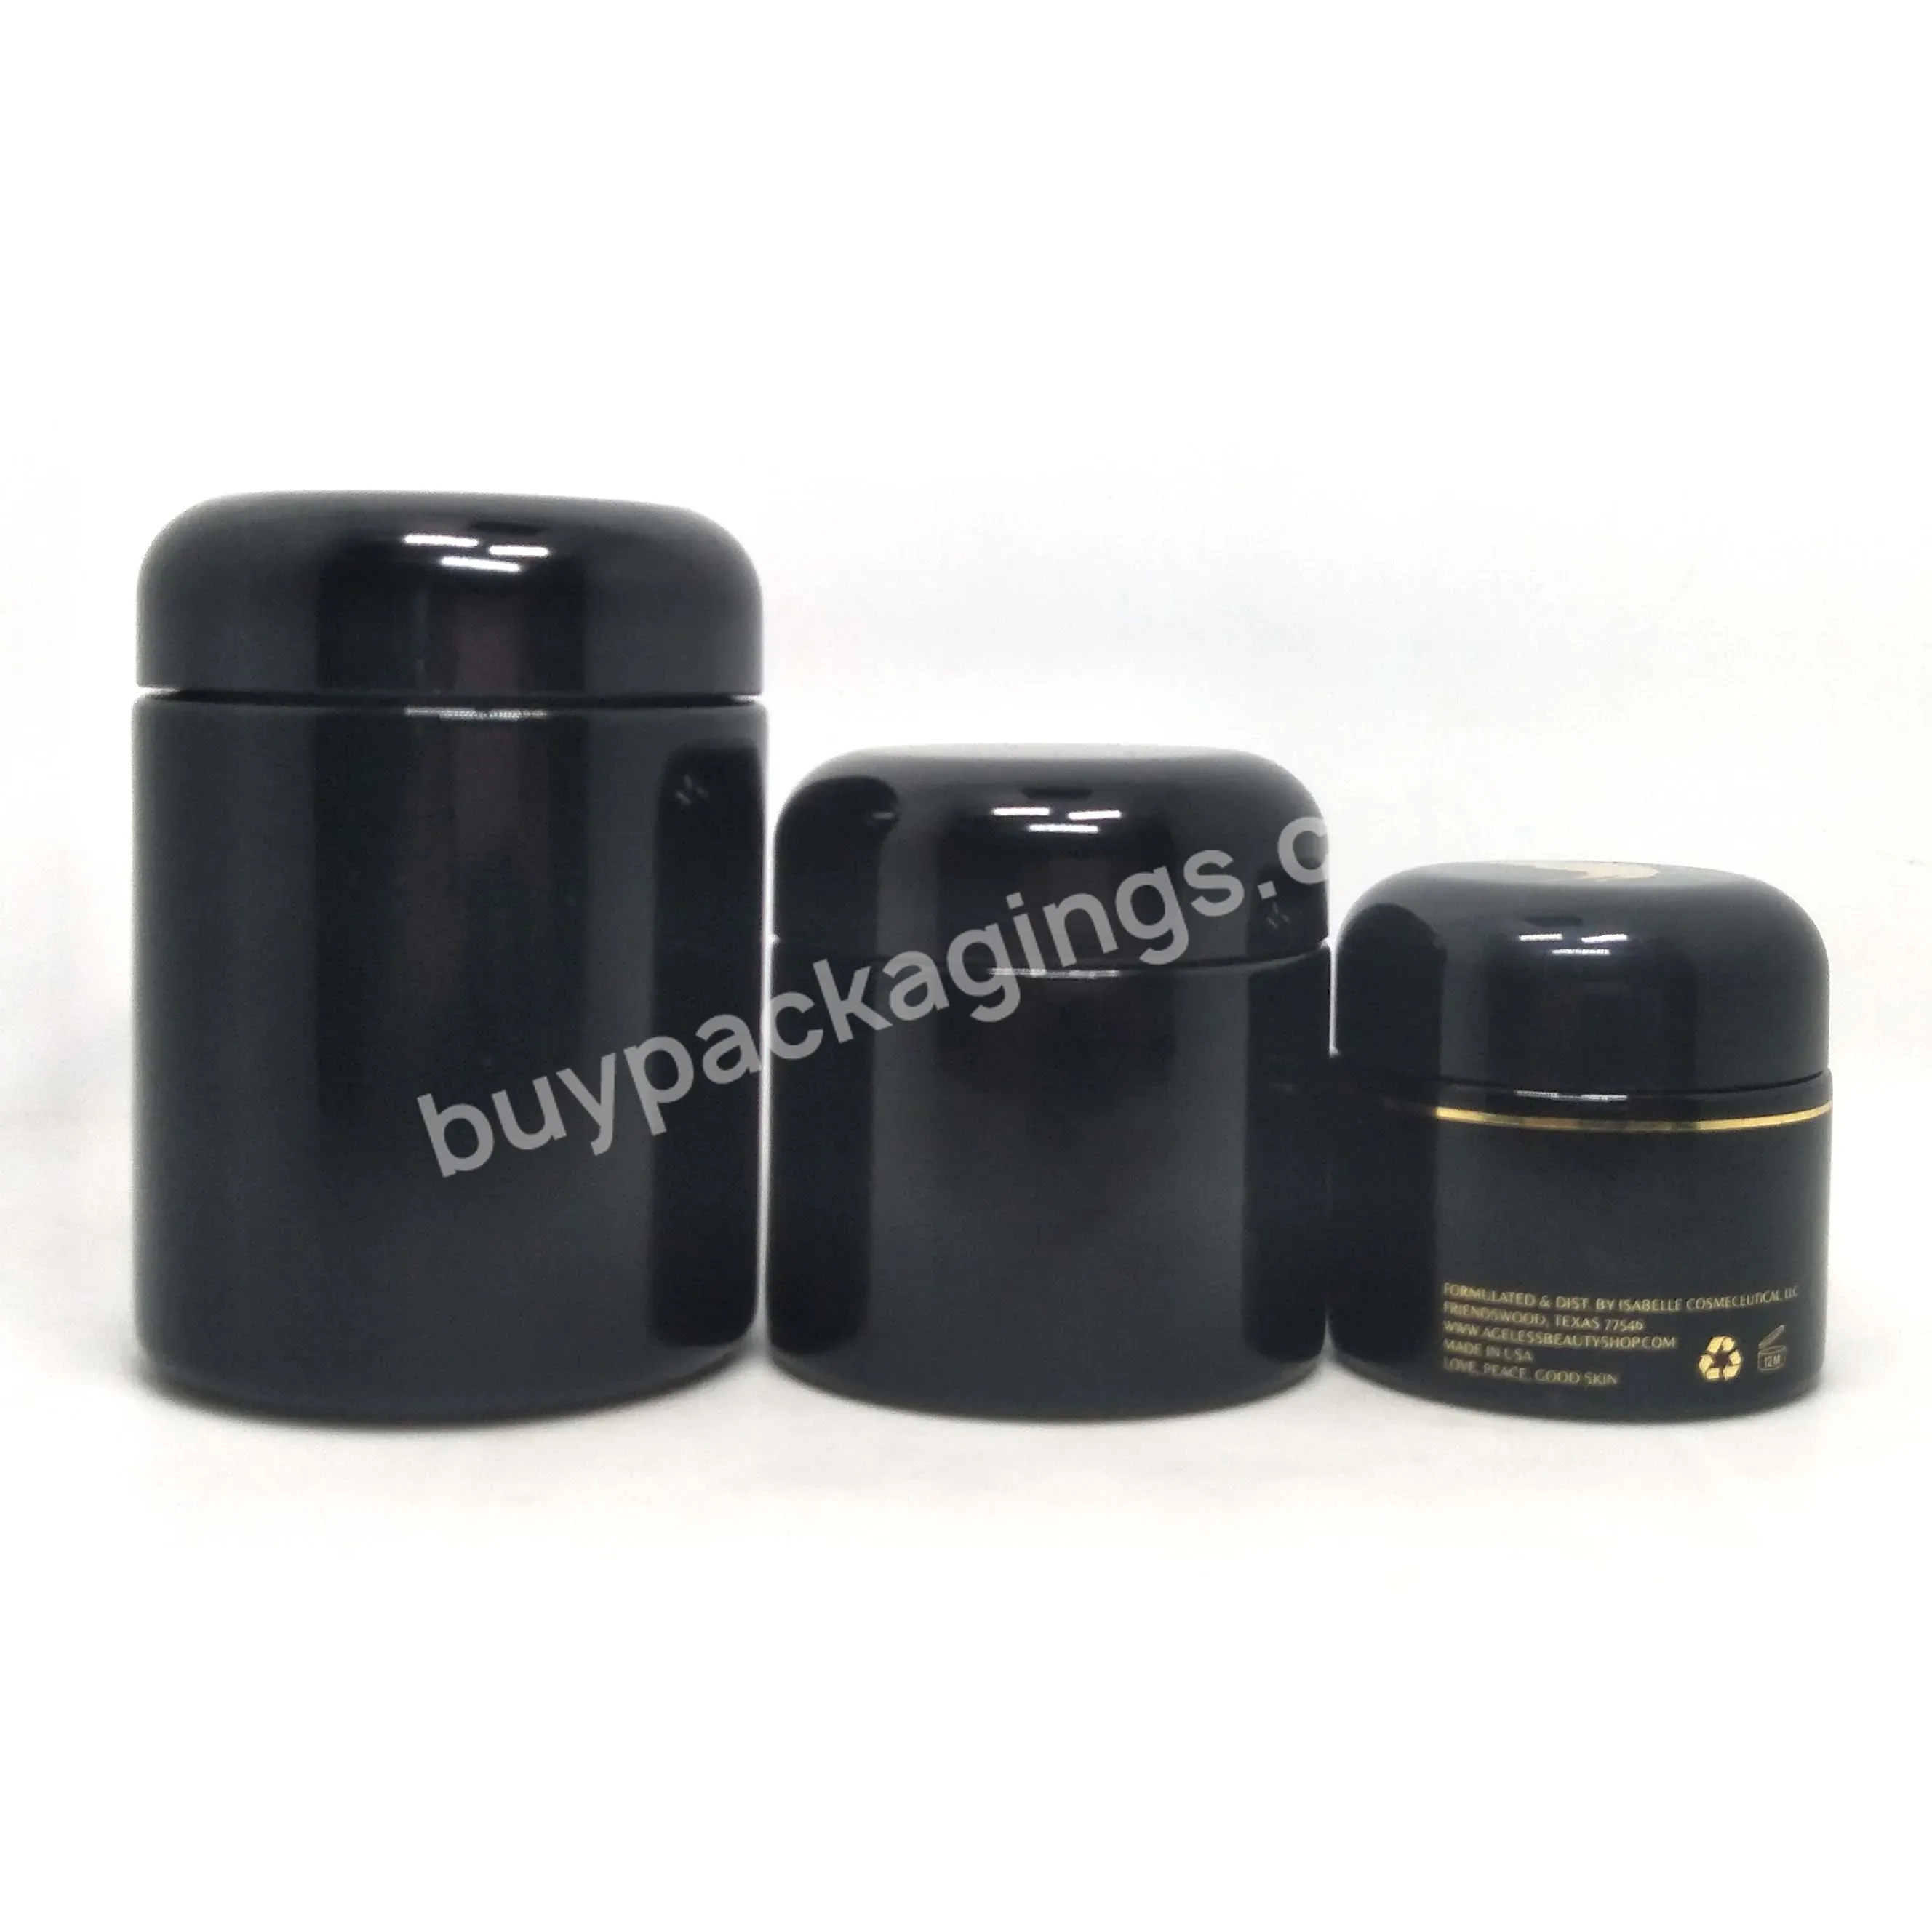 Gold Stamping Logo 60ml 120ml 250ml Violet Cosmetic Face Cream Jars 2 Oz 4 Oz 8 Oz 5g 10g 15g 30g 100g 250g 500g Black Glass Jar - Buy Violet Glass Jar,10ml 15ml 30ml 50ml 100ml Black Dark Uv Violet Glass Essential Oil Lotion Cosmetic Bottle And Jar,